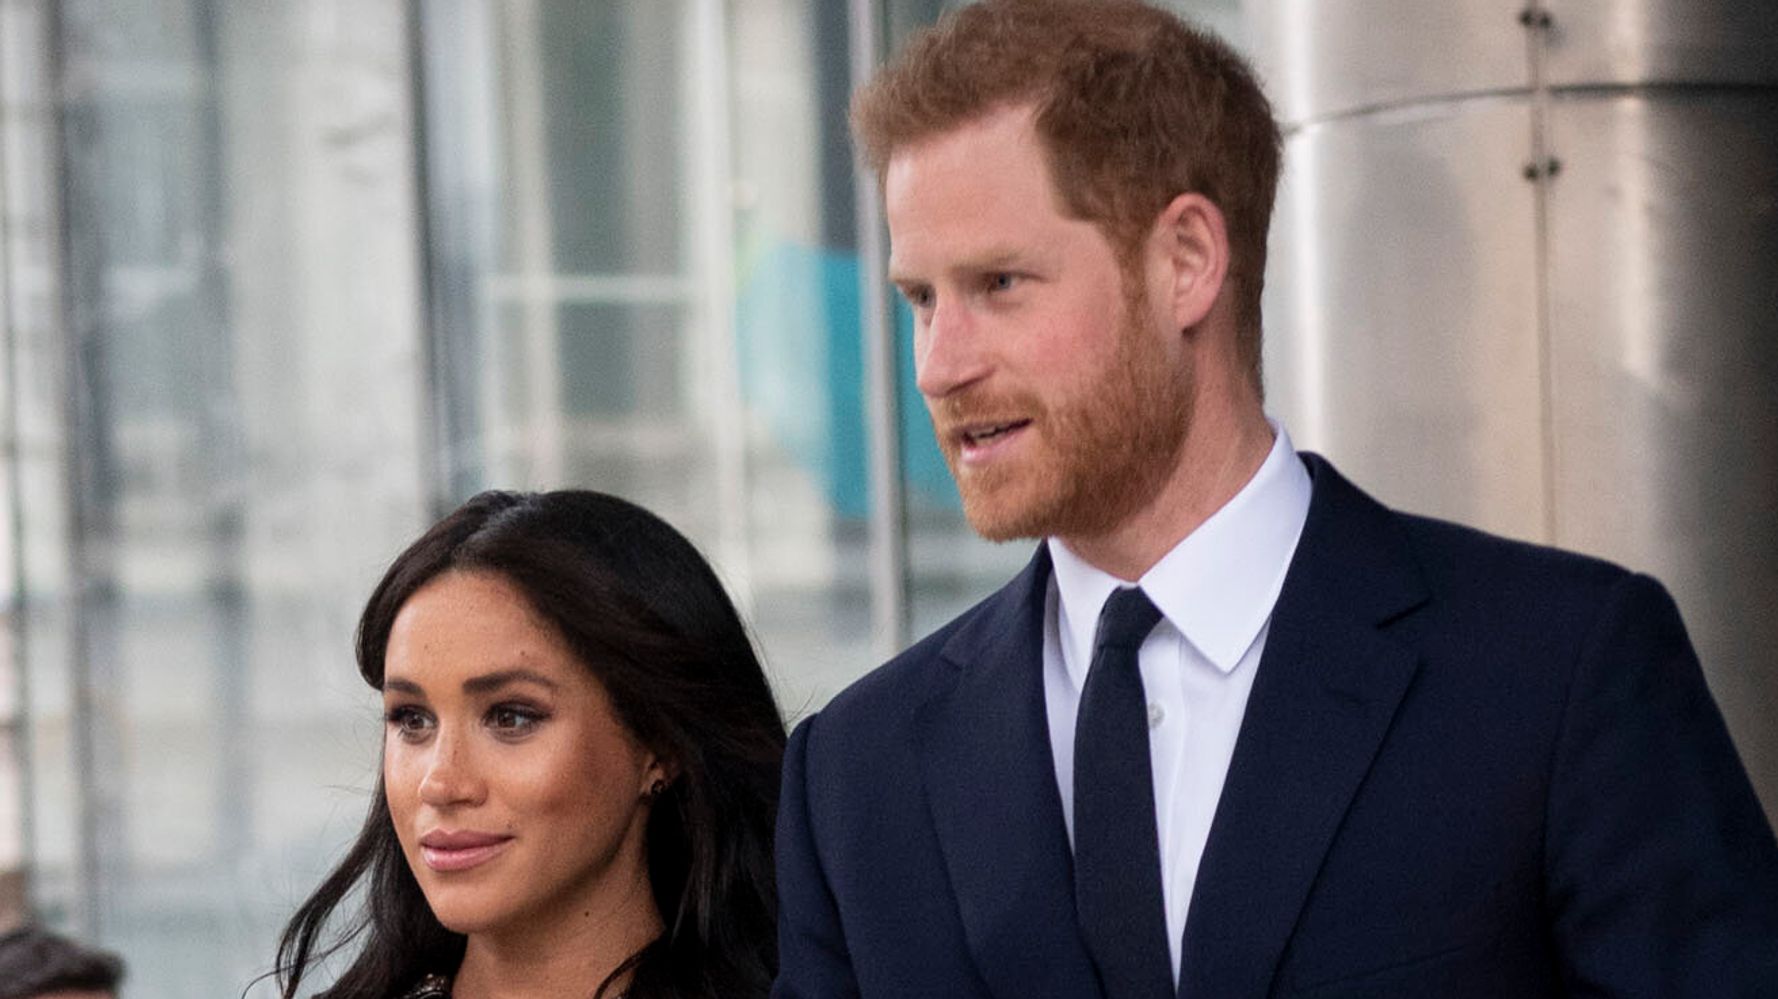 Meghan Markle and Prince Harry pay tribute to Prince Philip: “You will be very missed”